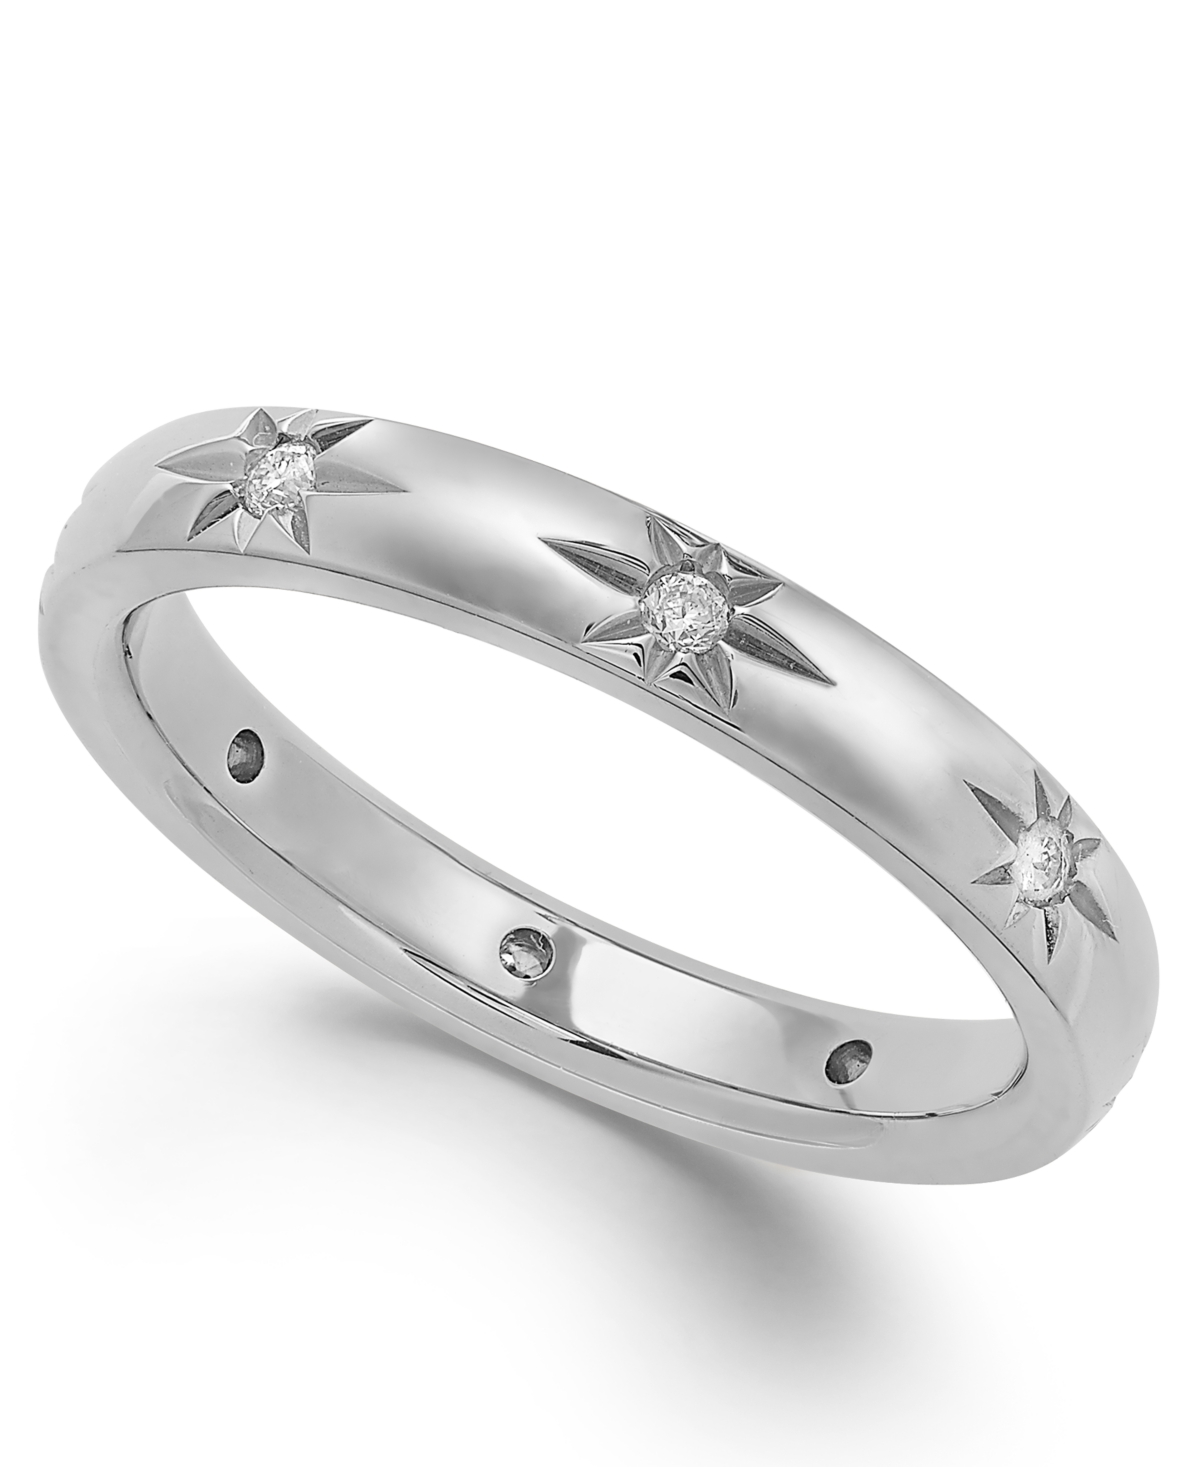 Star by Marchesa Diamond Star Wedding Band in 18k White Gold (1/8 ct. t.w.), Created for Macy's - White Gold